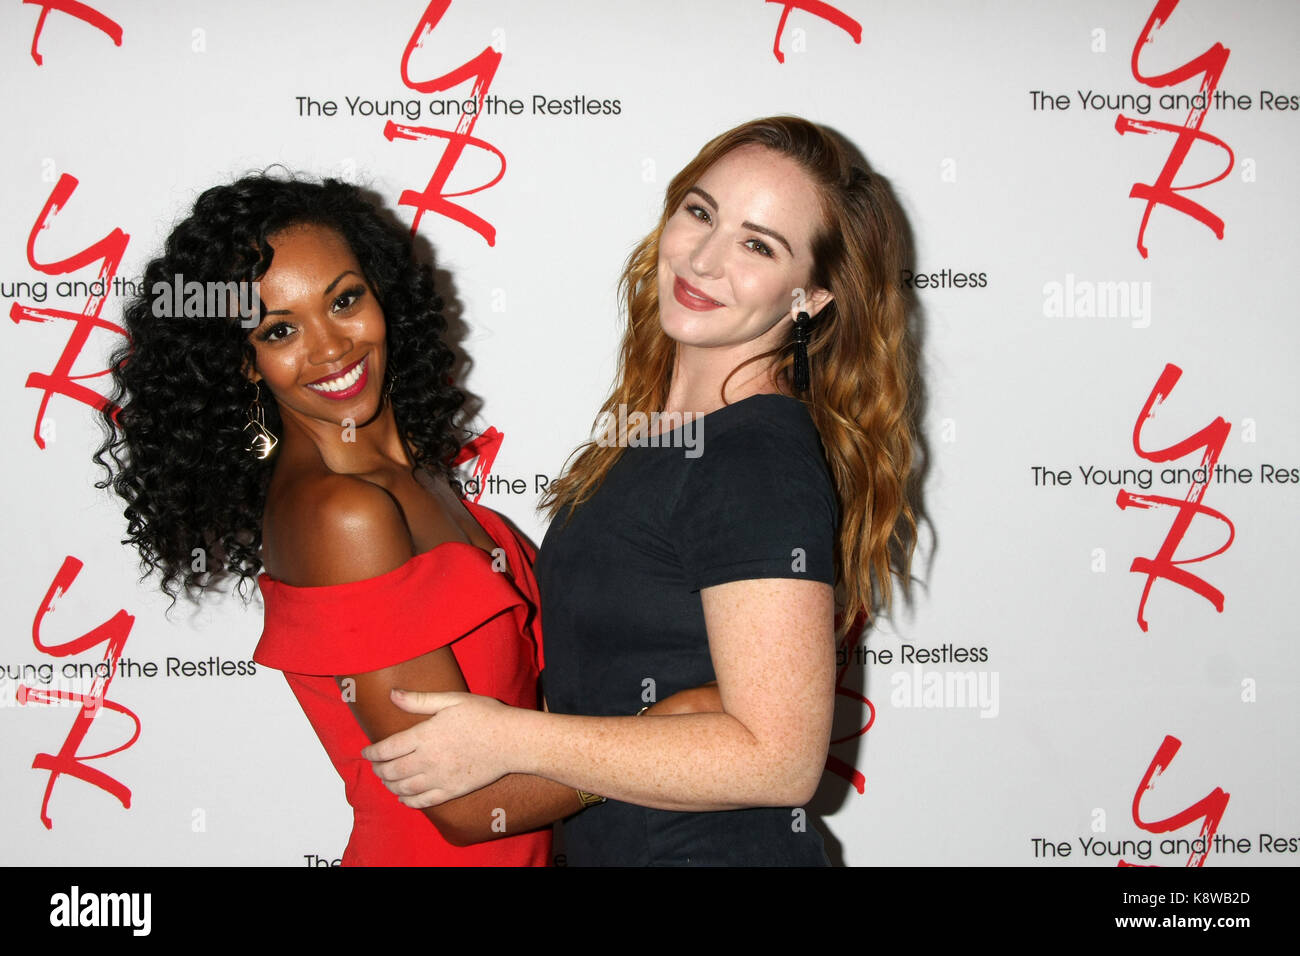 Young and Restless Fan Event 2017 at the Marriott Burbank Convention Center on August 19, 2017 in Burbank, CA  Featuring: Mishael Morgan, Camryn Grimes Where: Burbank, California, United States When: 20 Aug 2017 Credit: Nicky Nelson/WENN.com Stock Photo